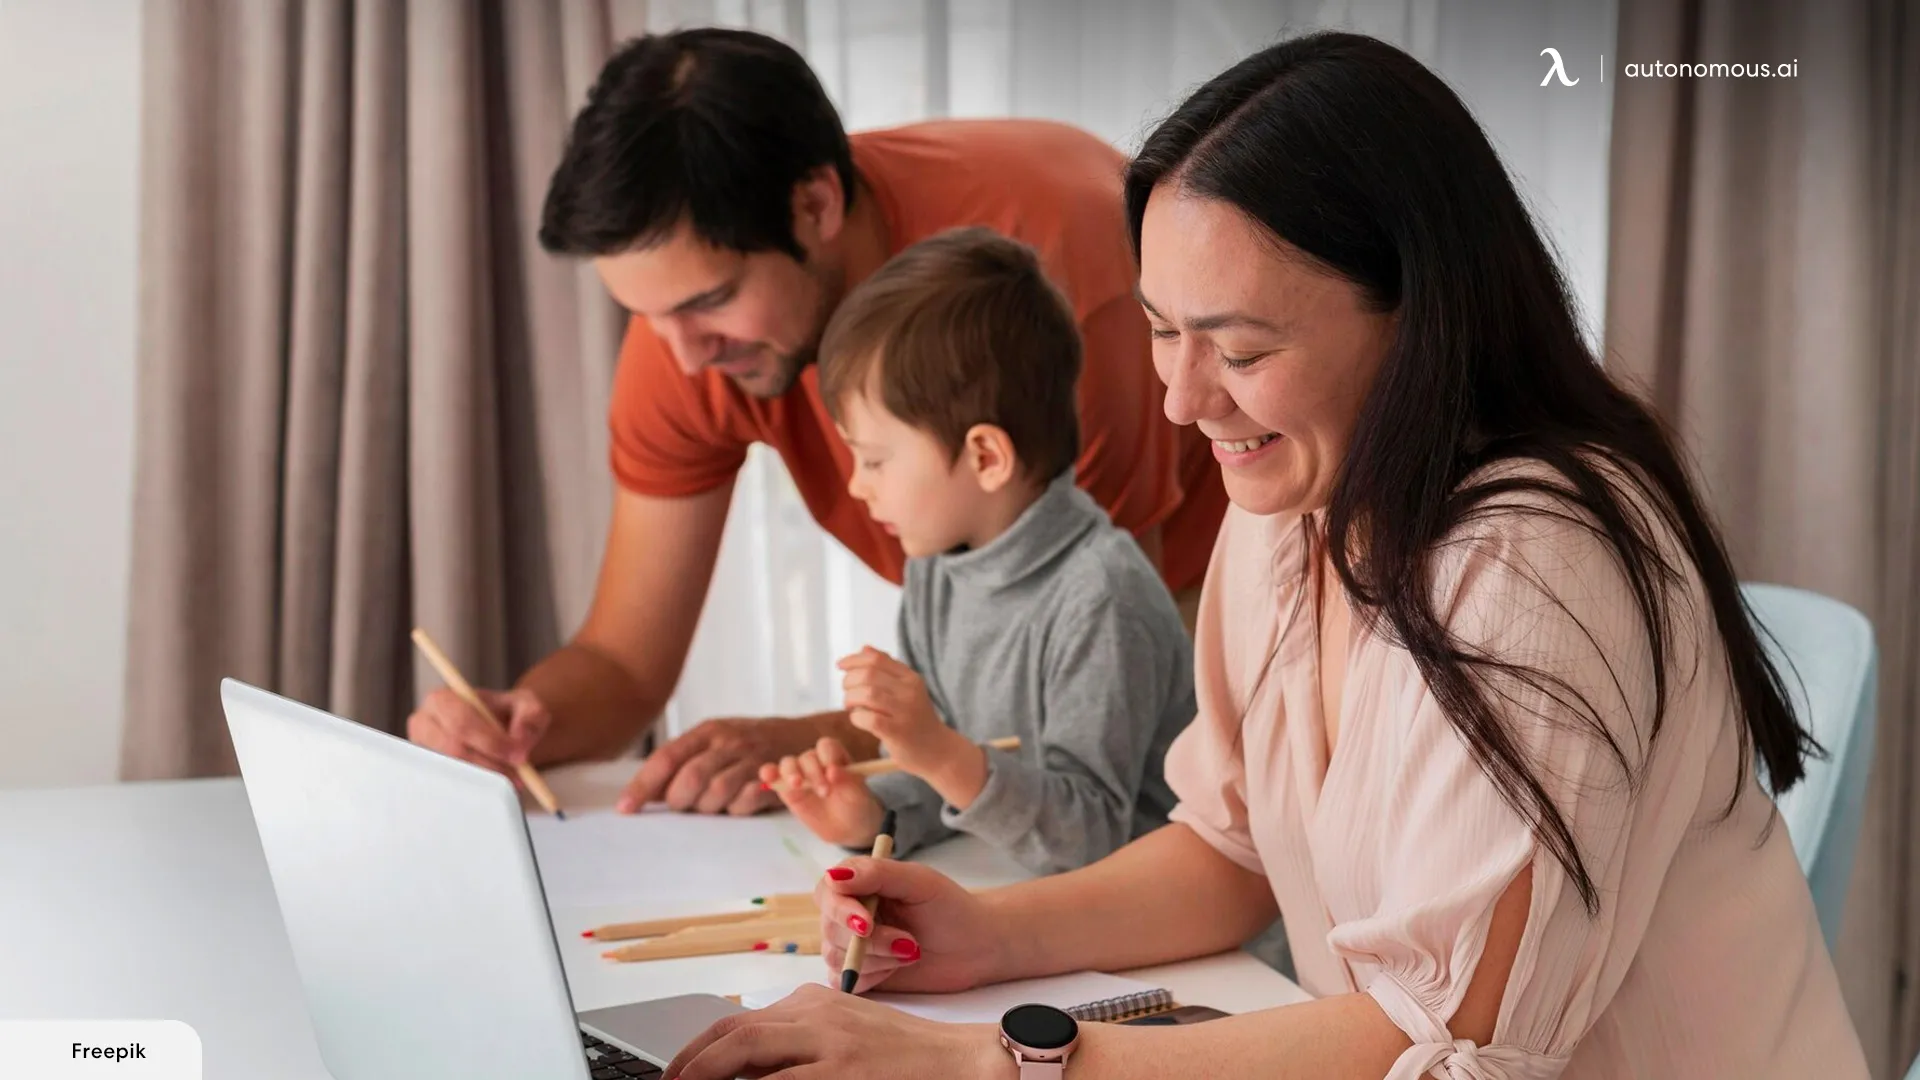 How to Balance Work and Family - Top 8 Tips!